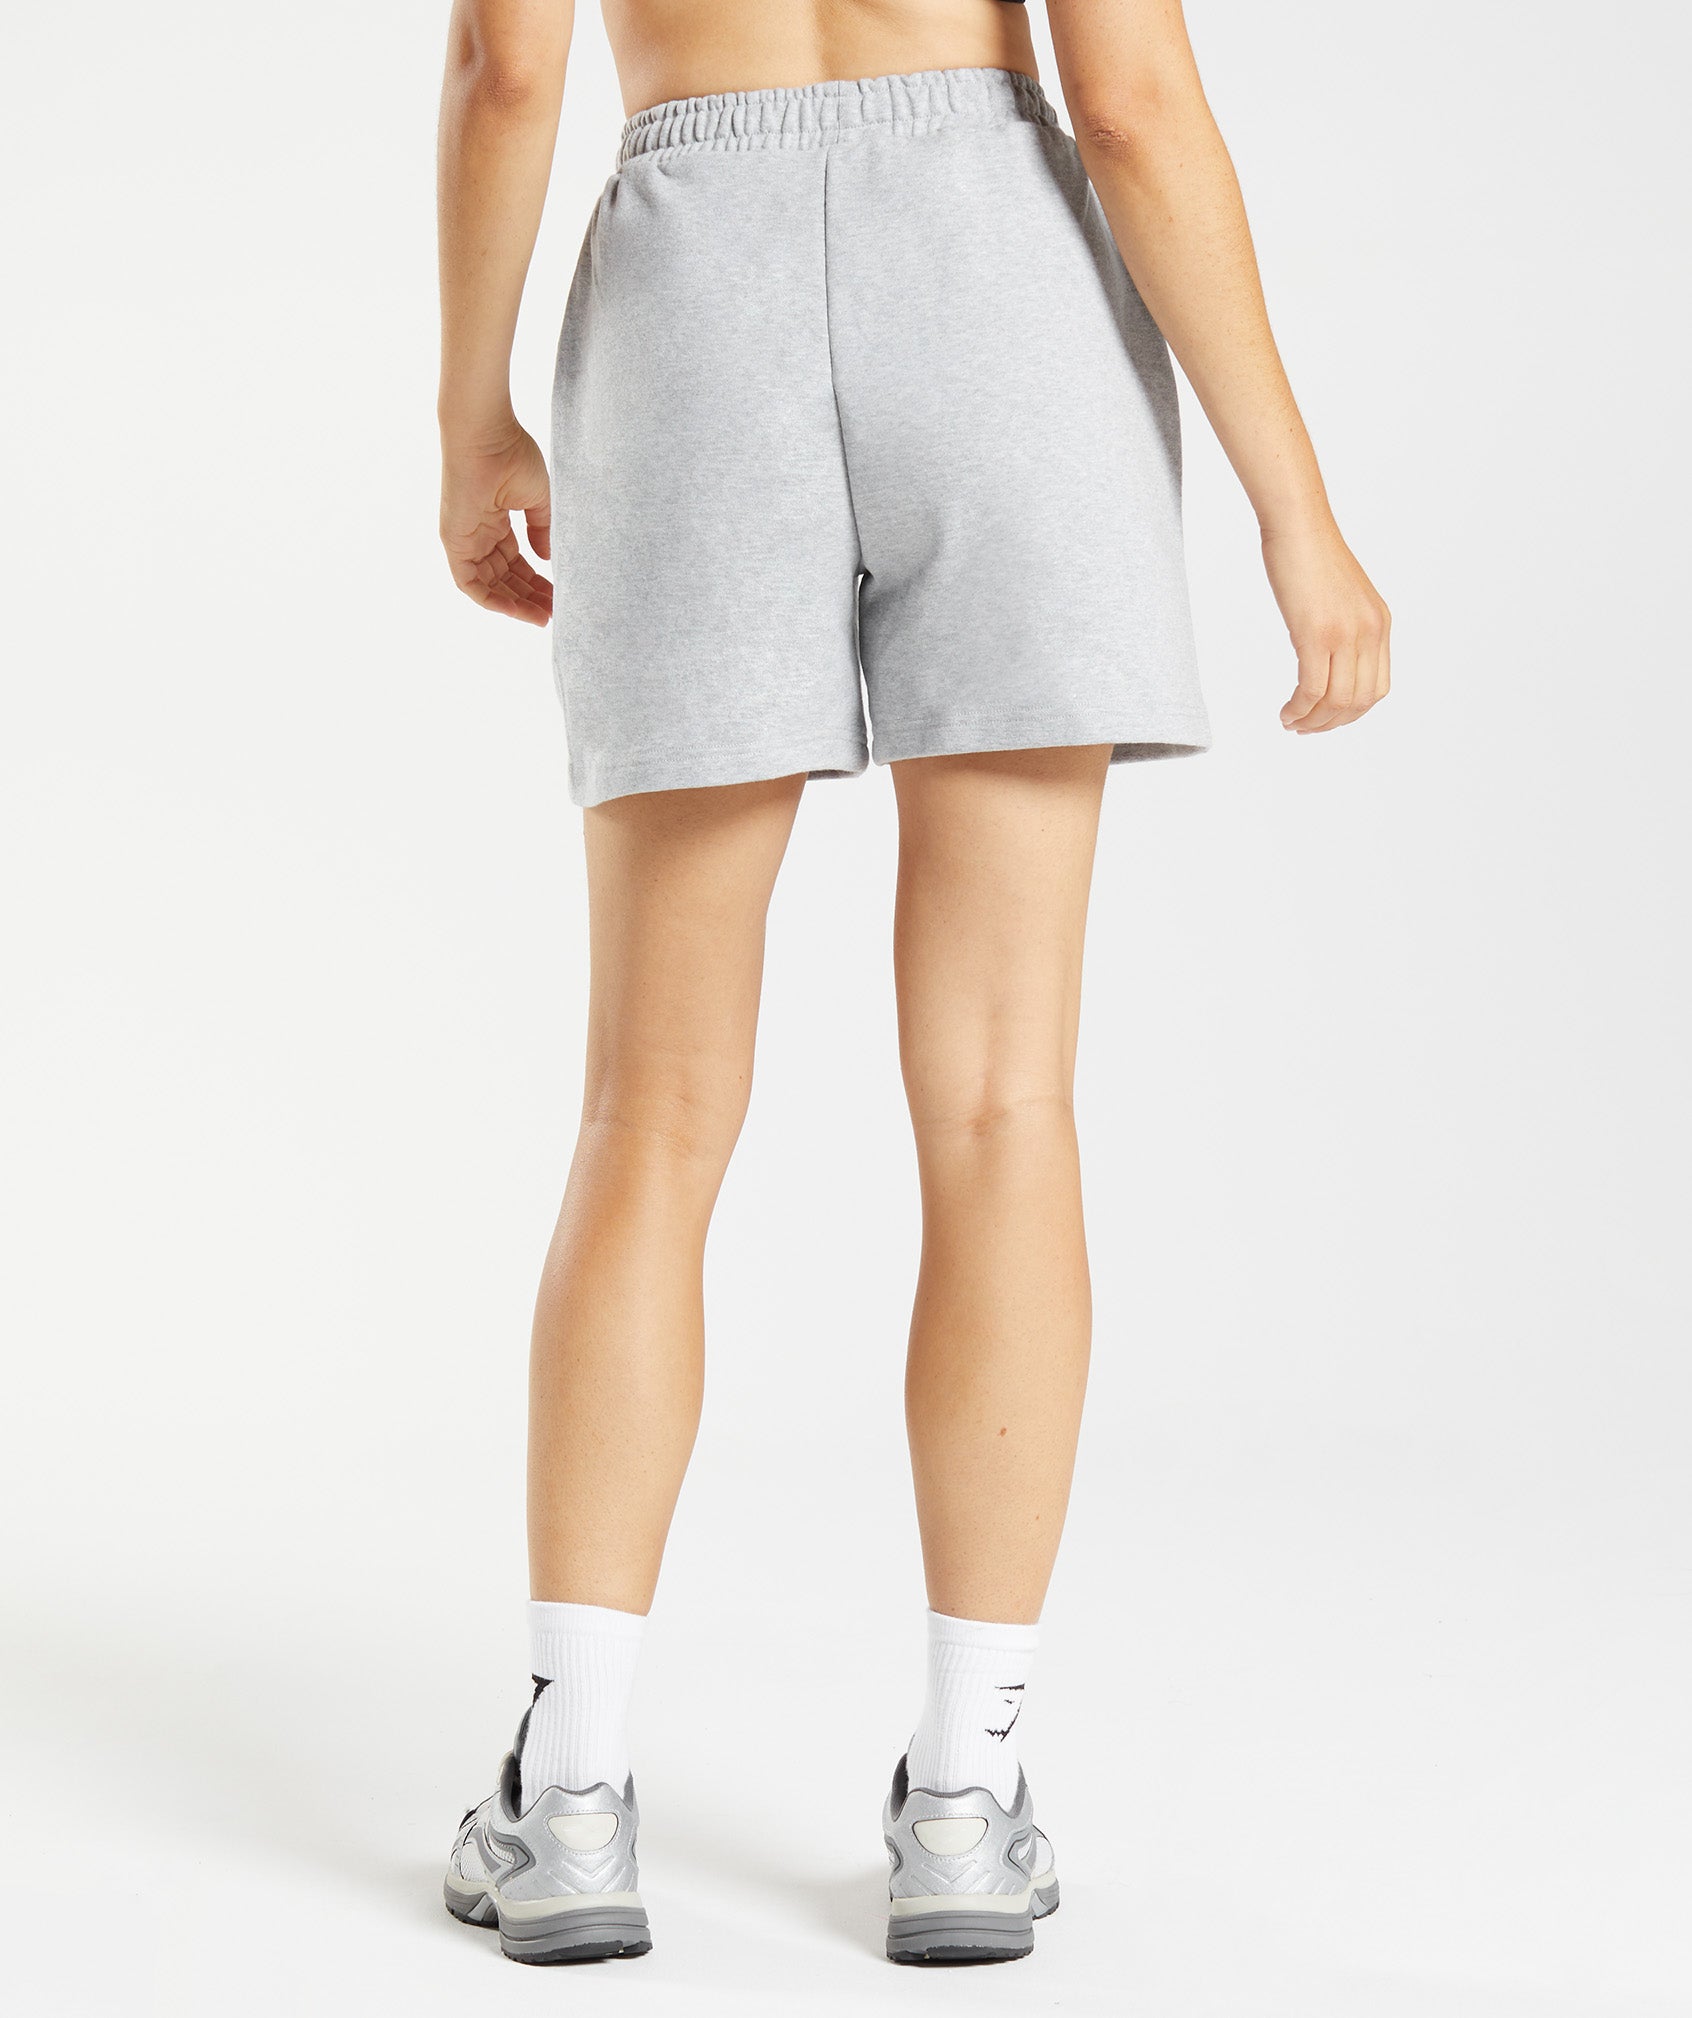 Rest Day Sweats Shorts in Light Grey Core Marl - view 2